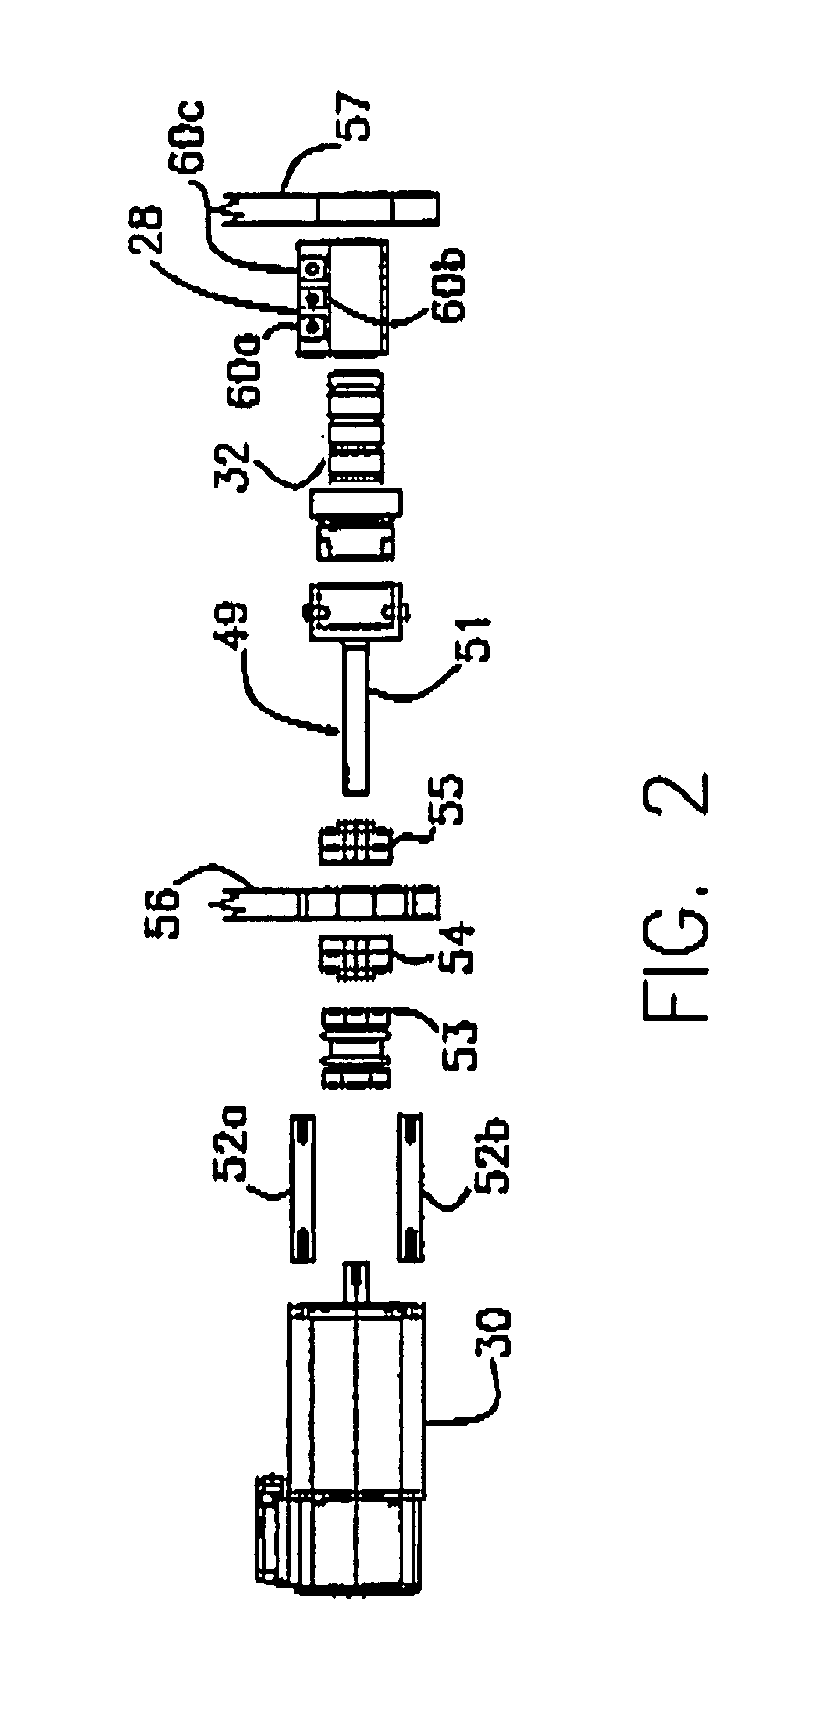 Apparatus for filling food trays at high speeds